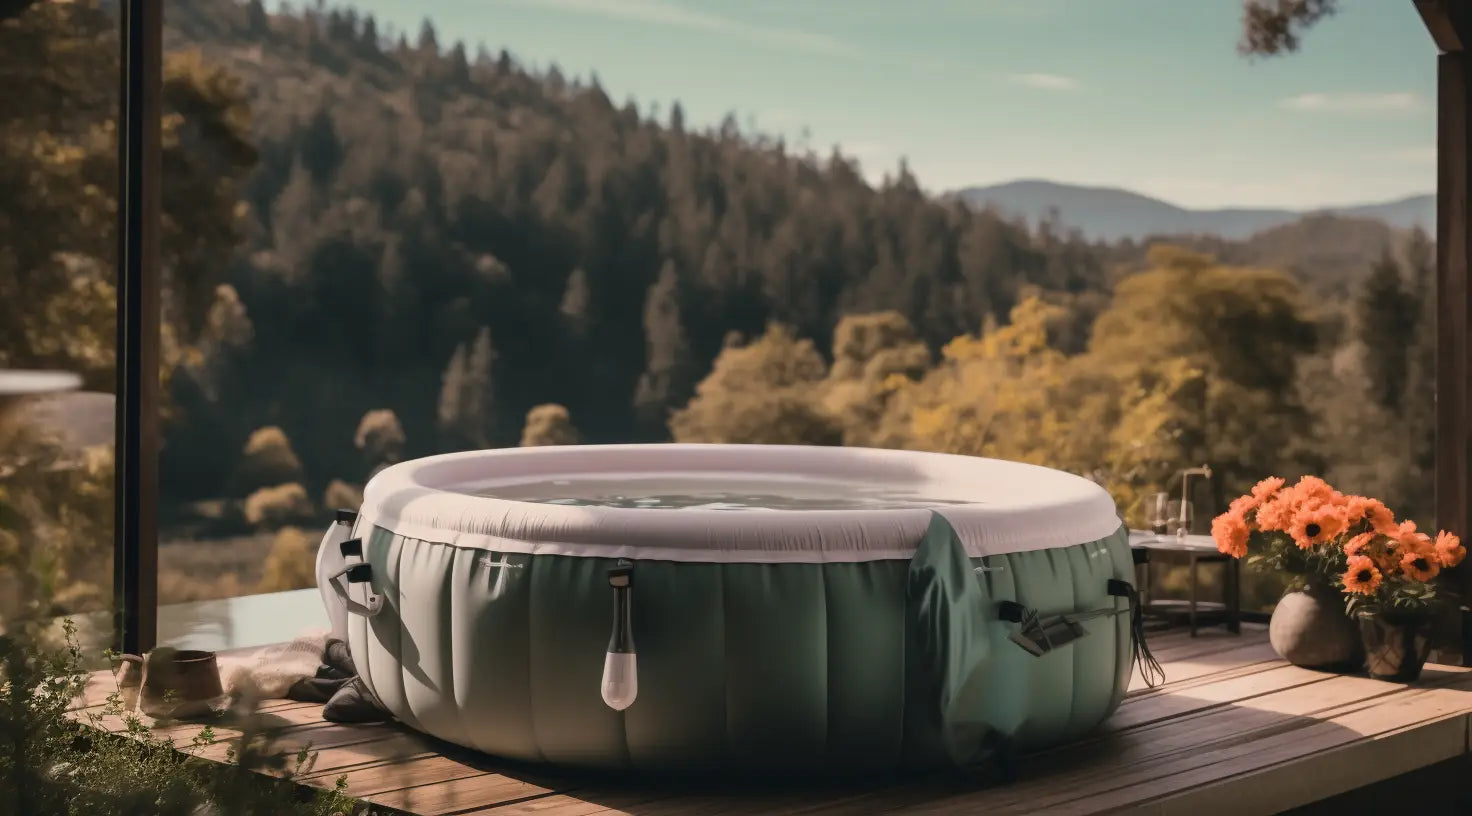 Types of Inflatable Hot Tubs: A Quick Guide to UK Brands